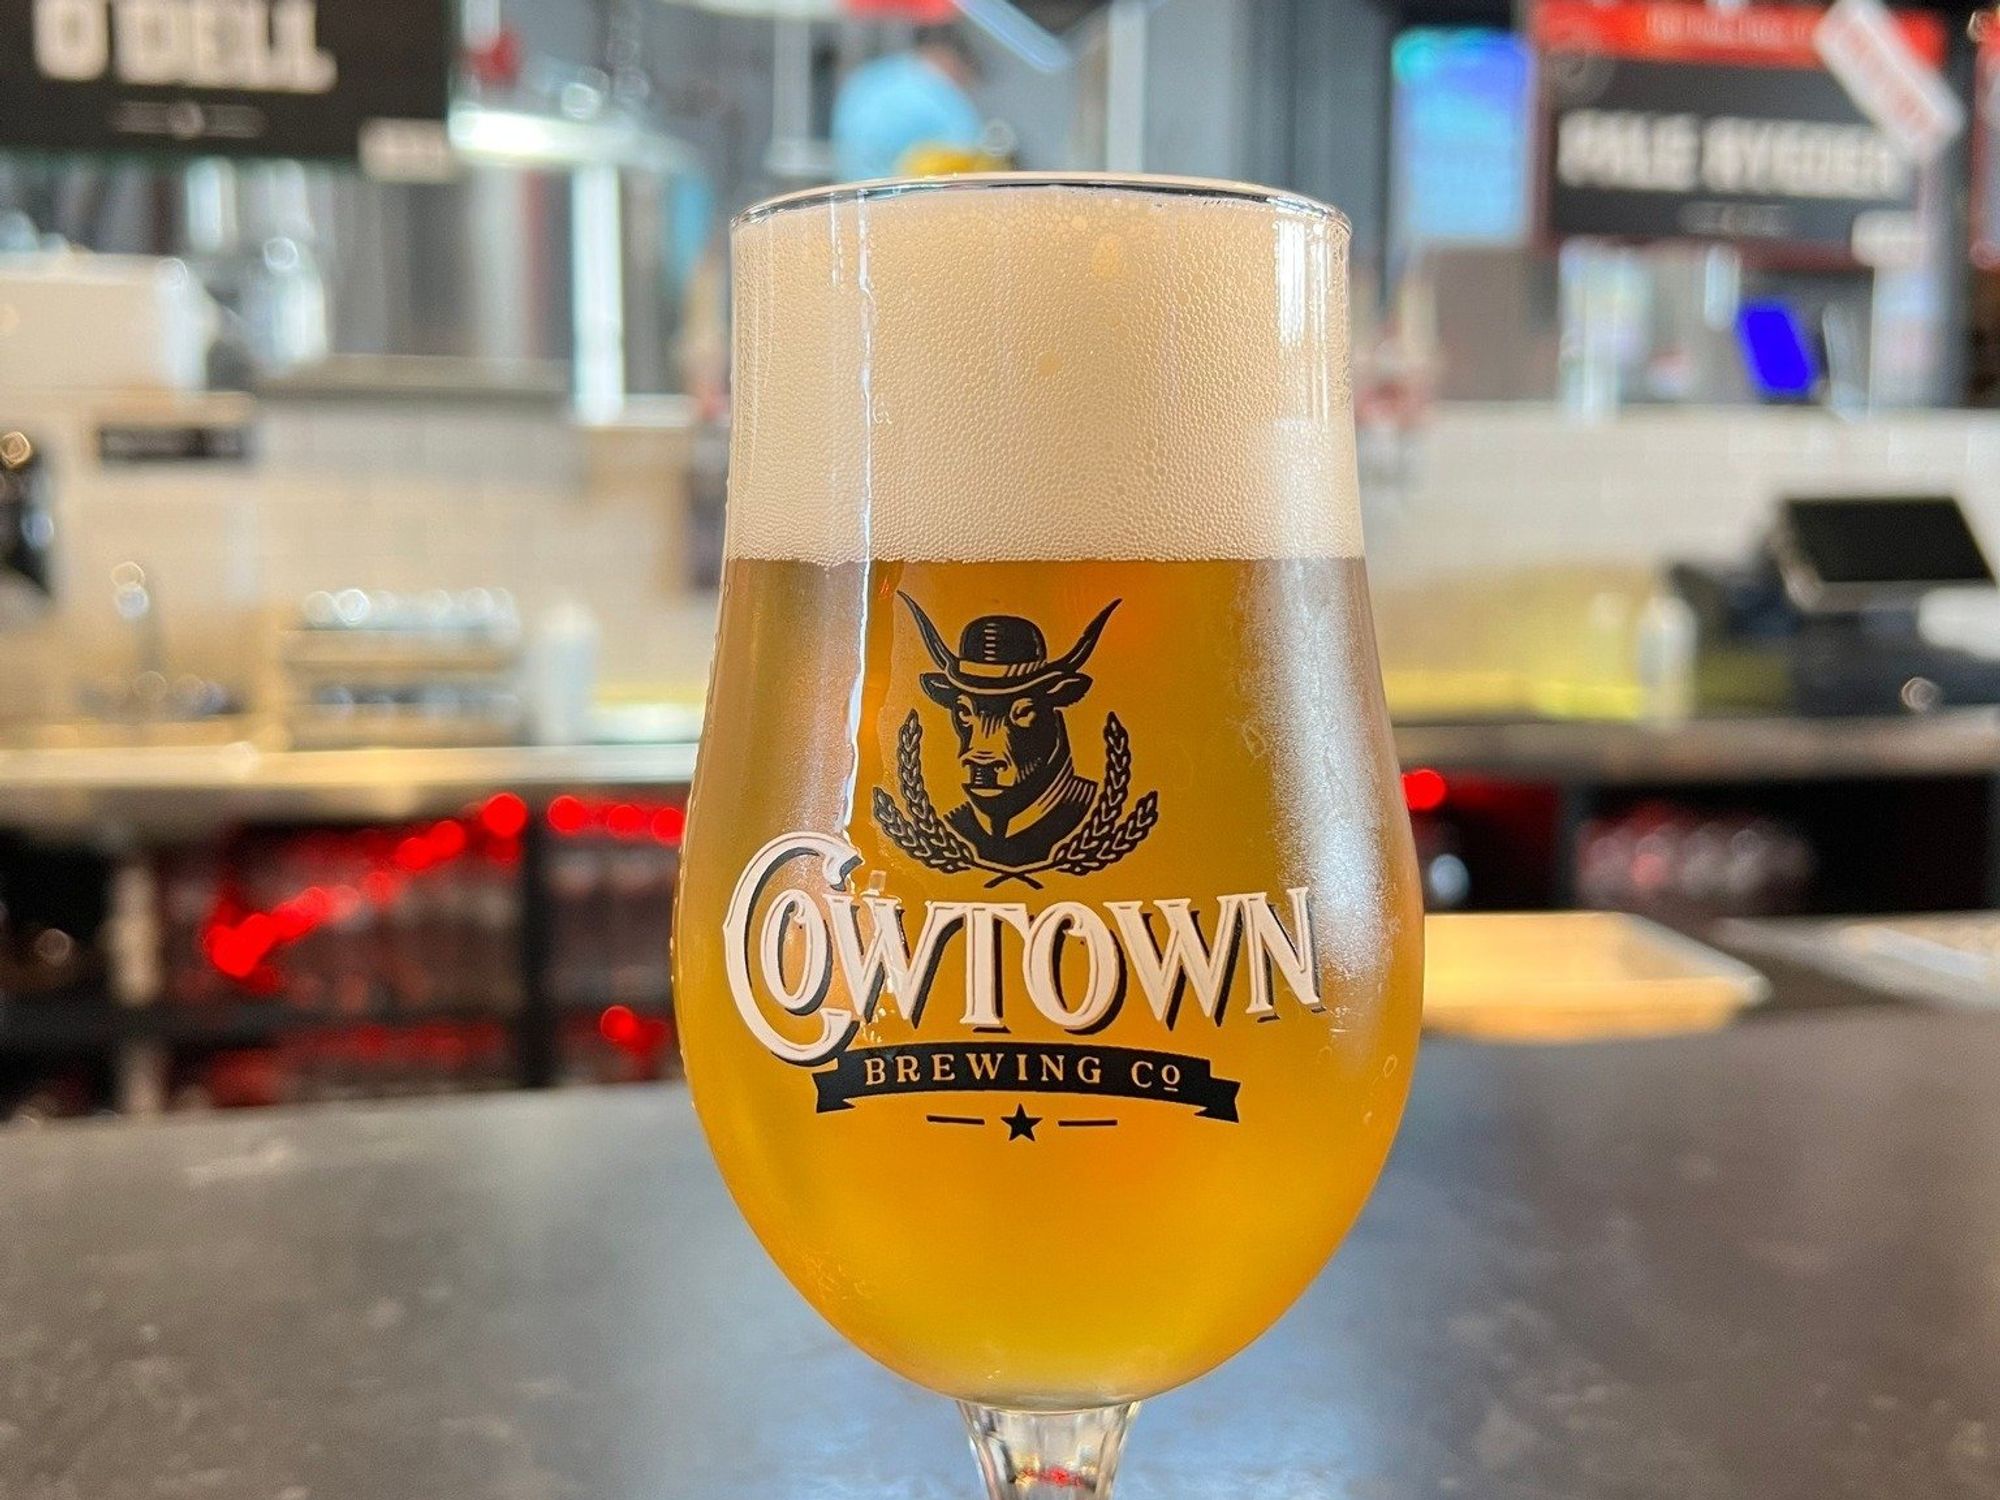 Cowtown Brewing